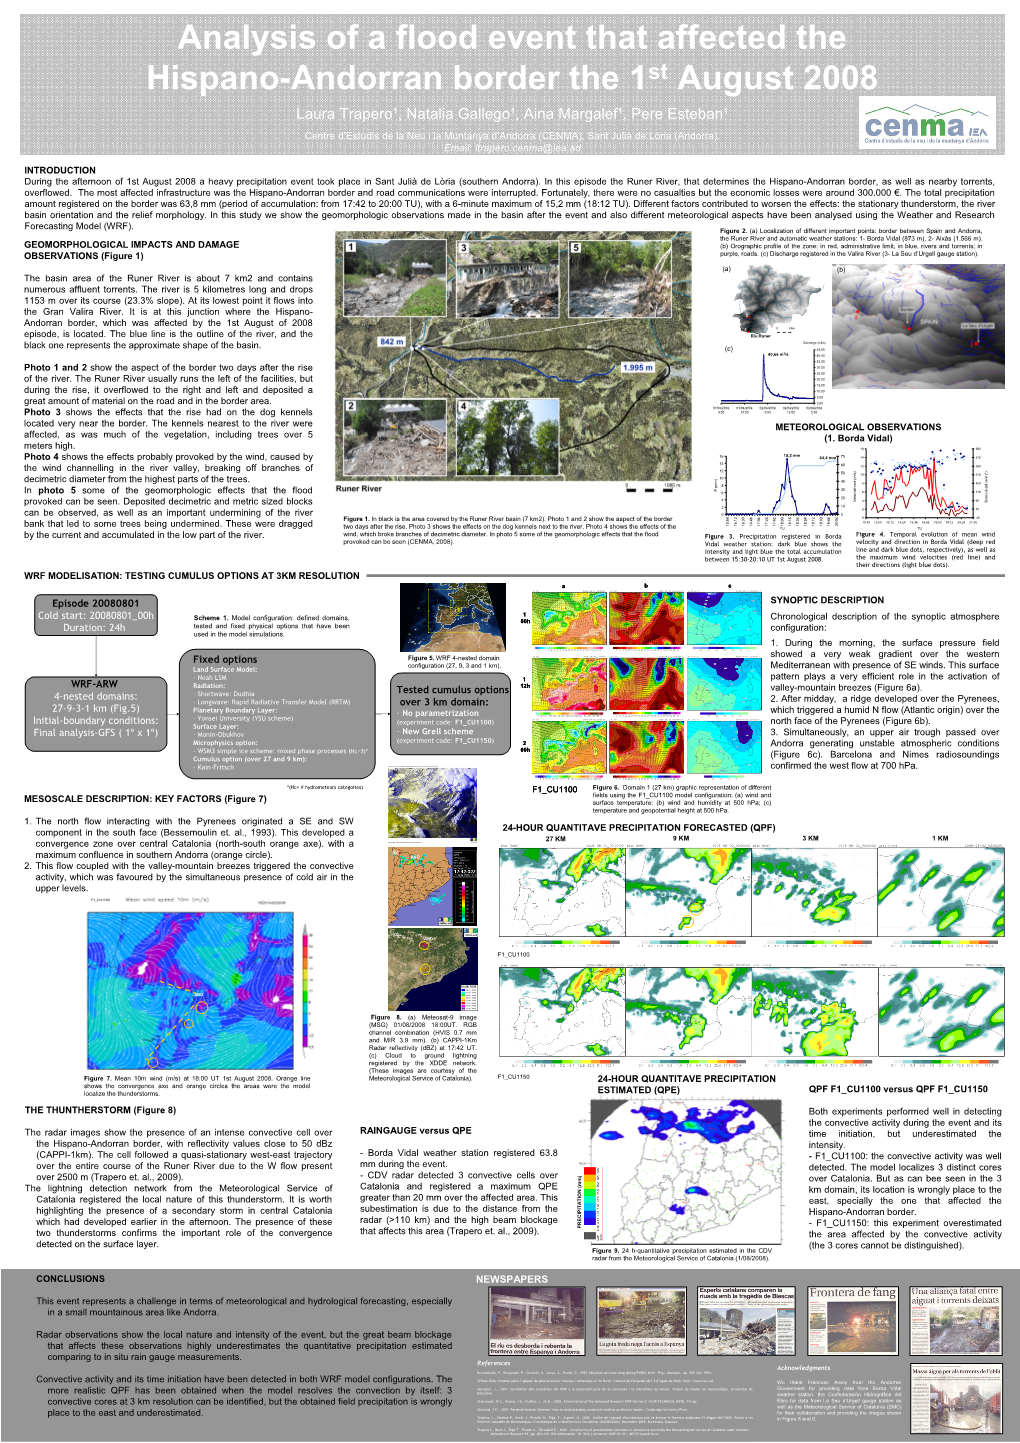 Analysis of a Flood Event That Affected the Hispano-Andorran Border The